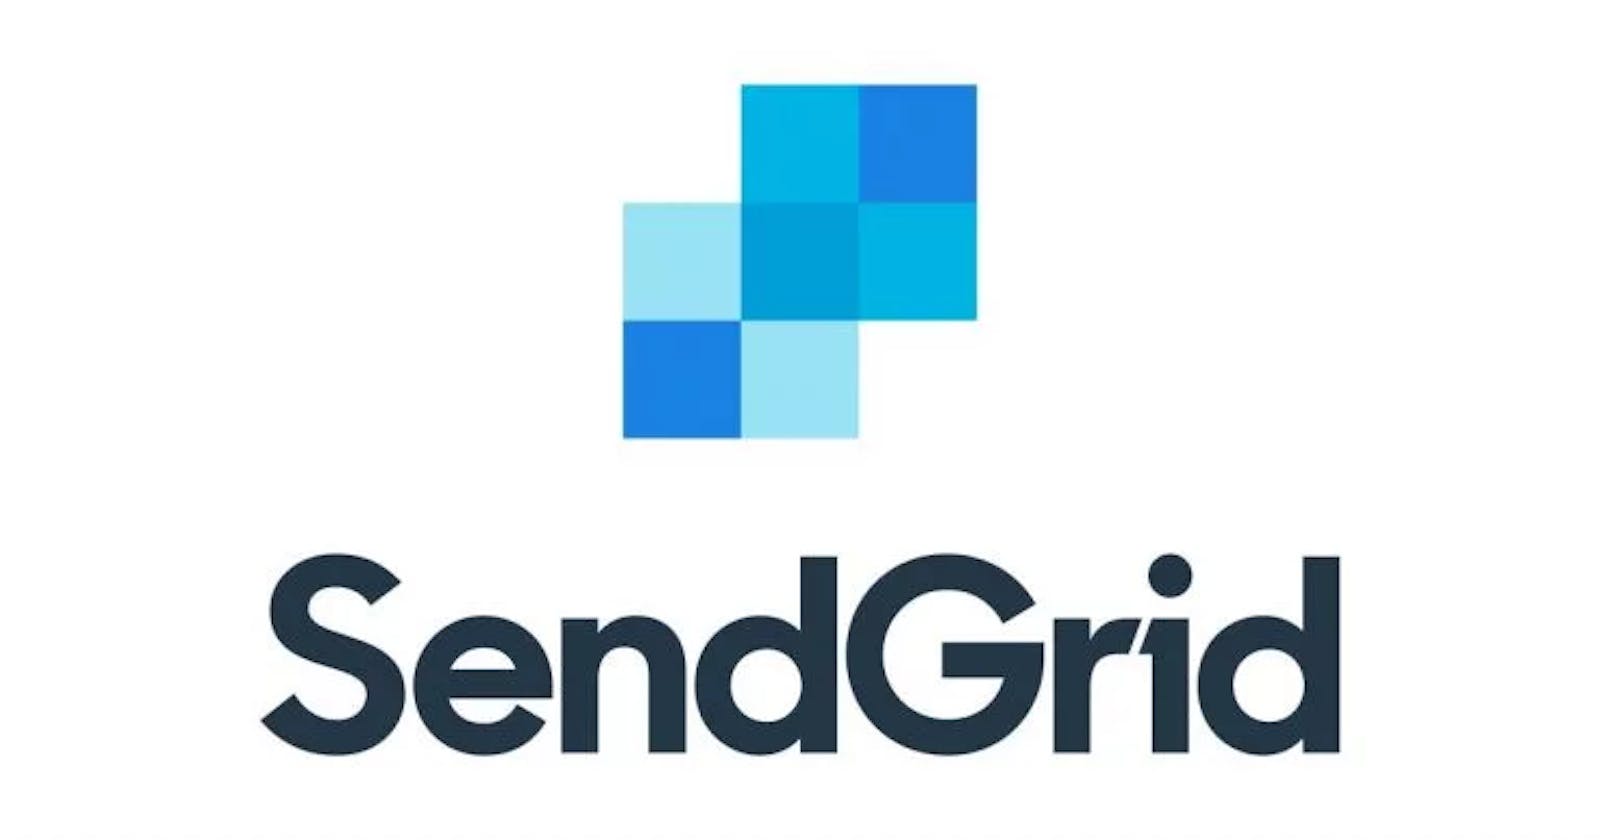 Serverless email notifications with Sendgrid